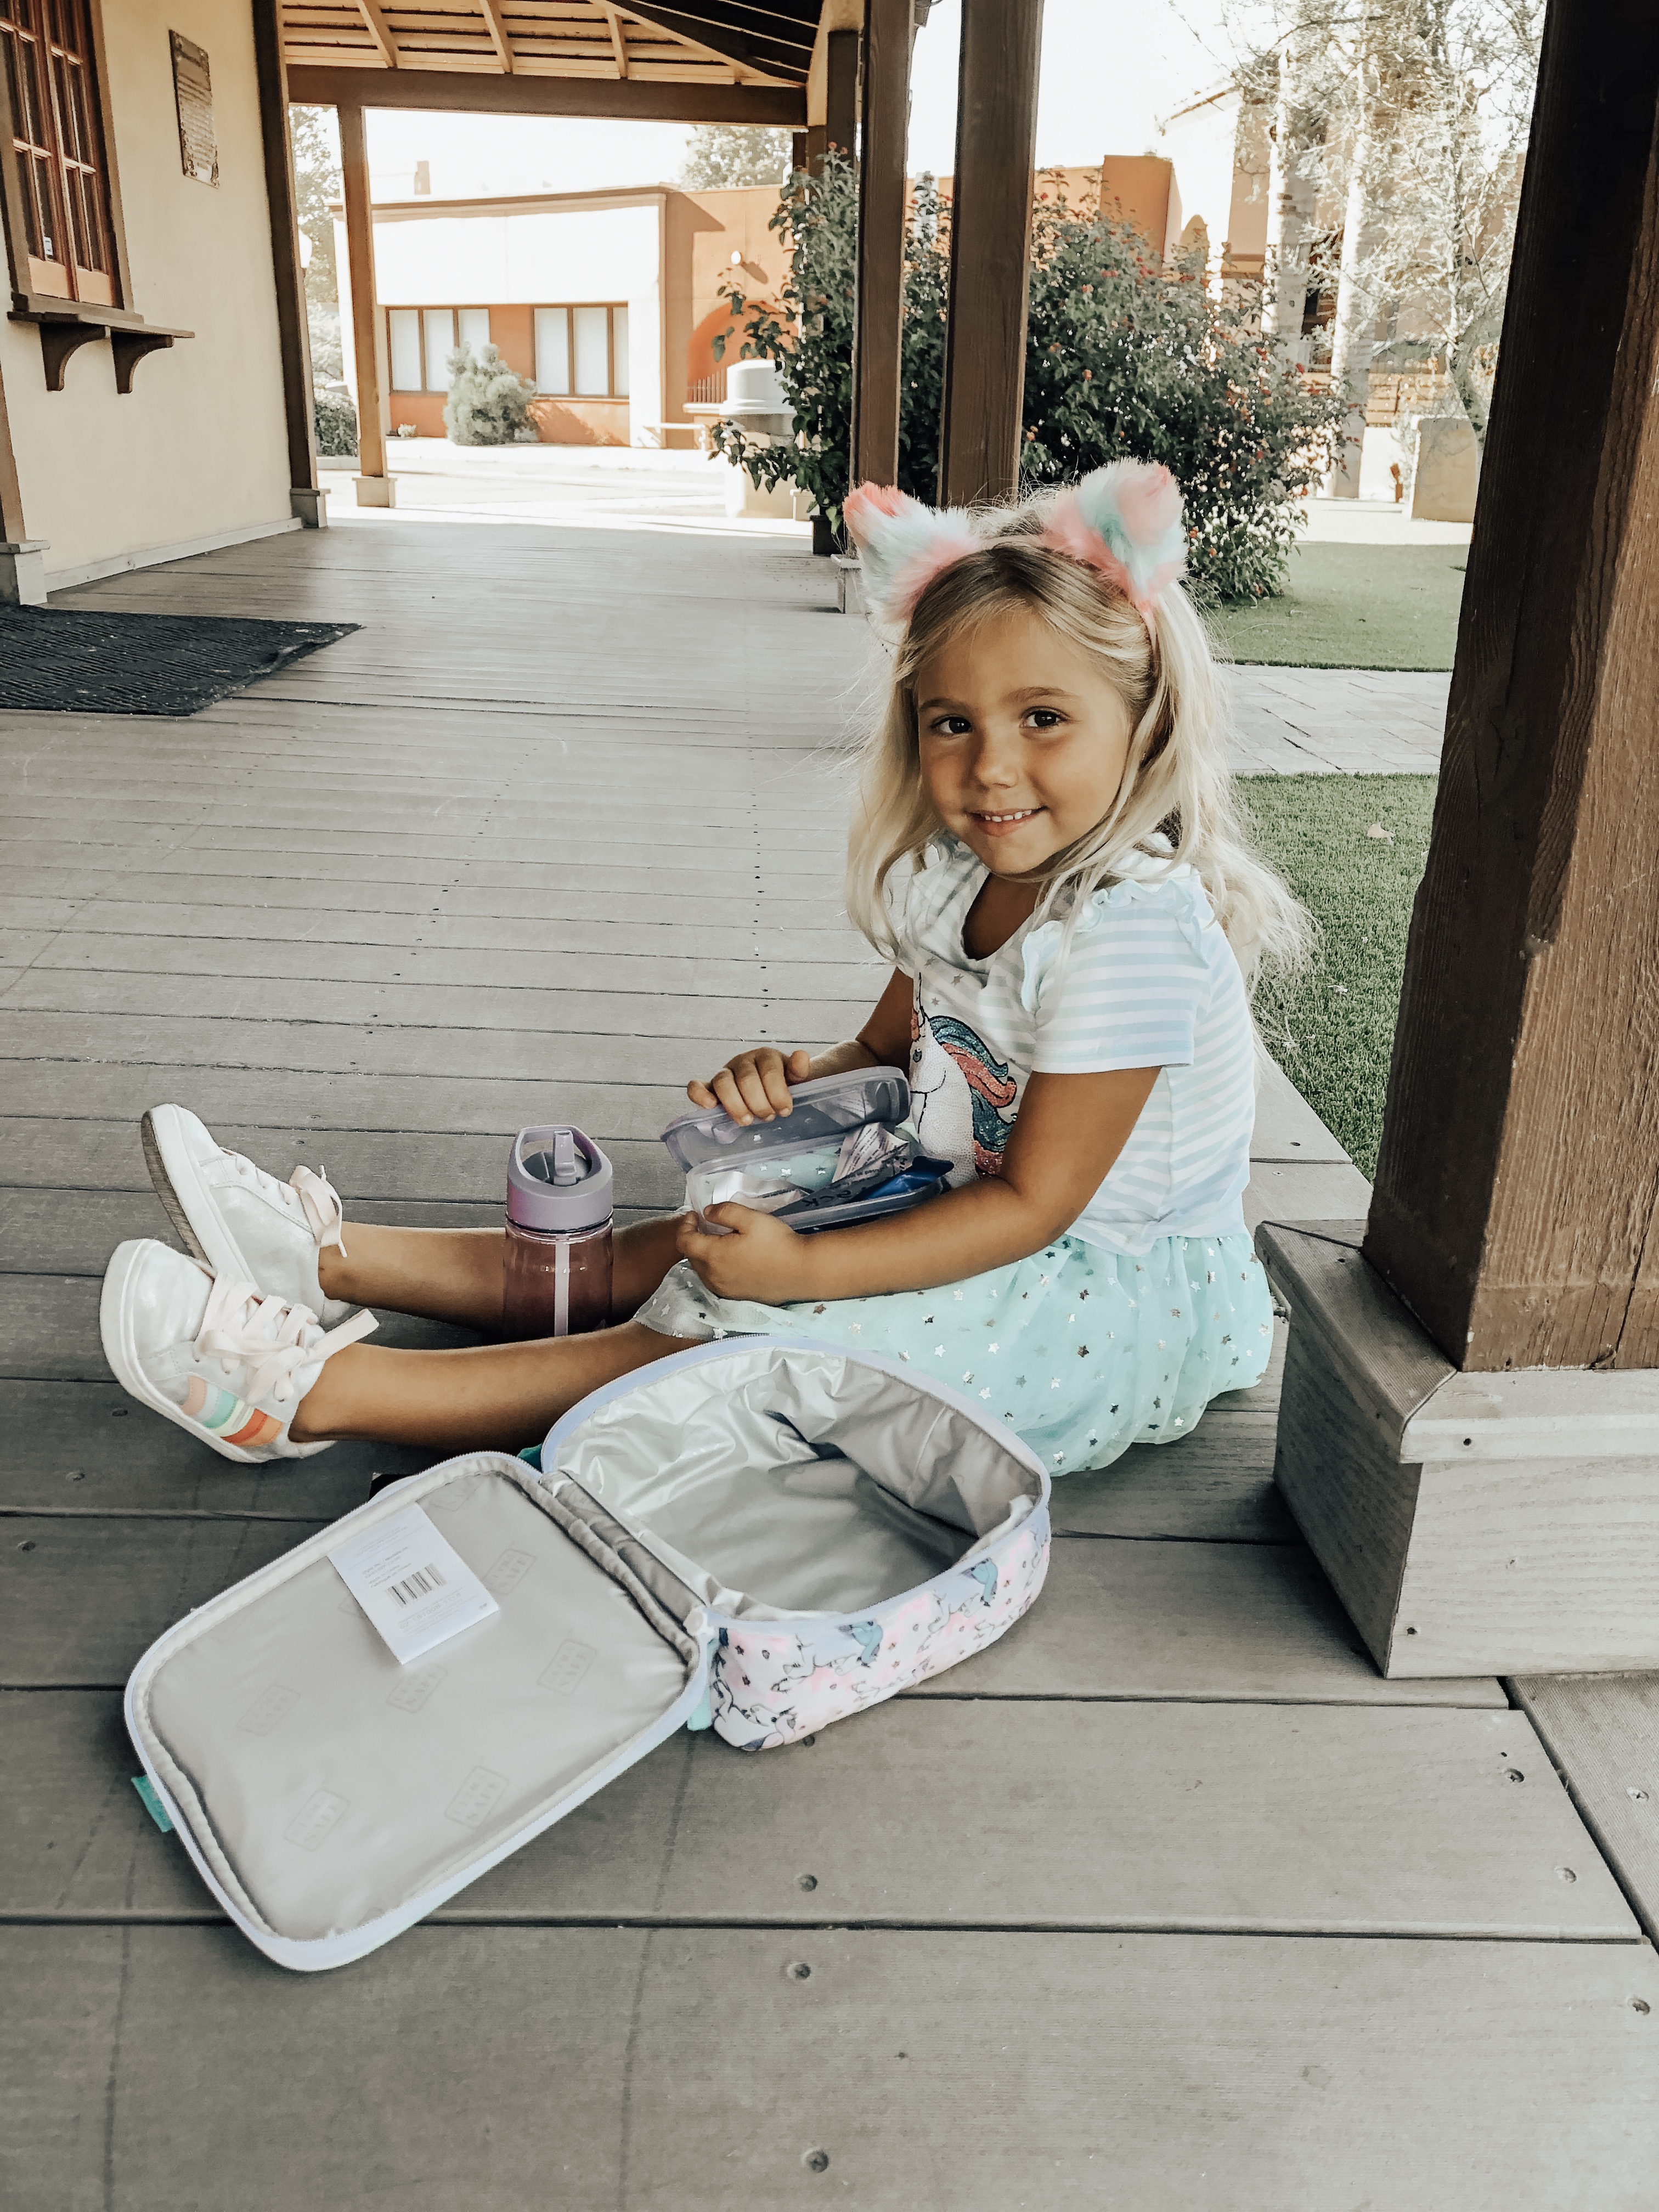 BACK TO SCHOOL WITH WALMART- Jaclyn De Leon Style= The kids are heading back to school and I'm sharing all the must have's from backpacks and lunches to kid style. And everything is affordable and a one stop shop from Walmart.